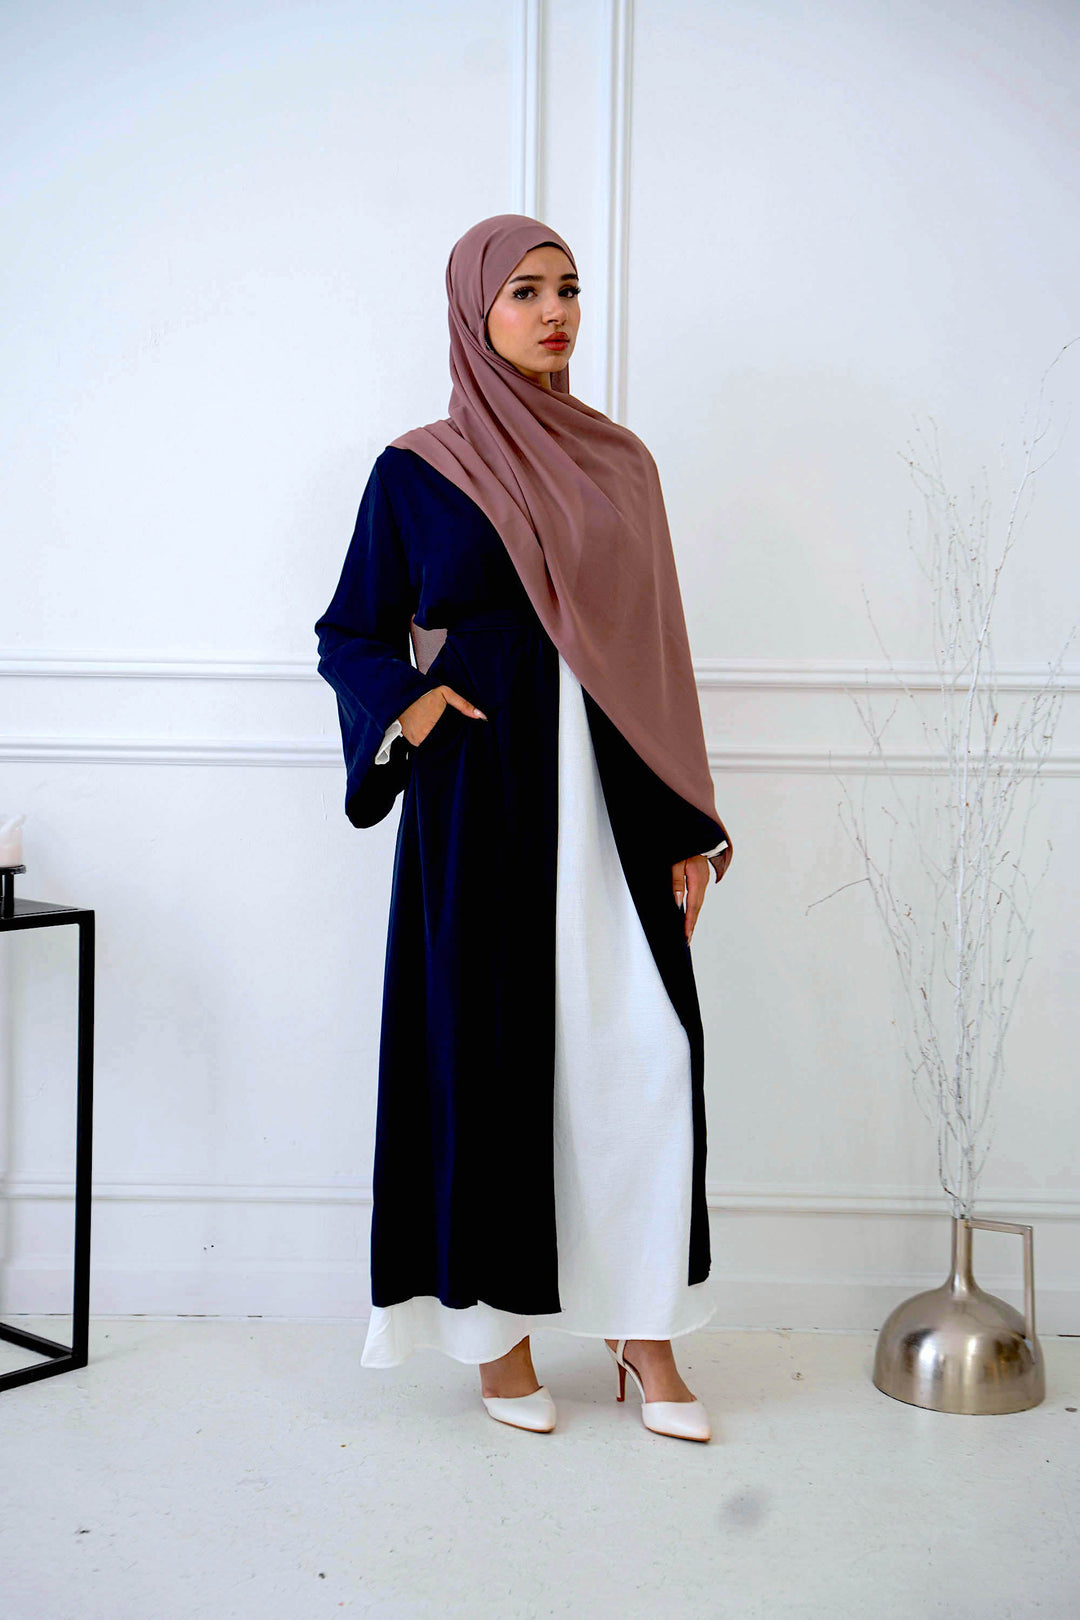 a woman wearing a hijab standing in front of a white wall